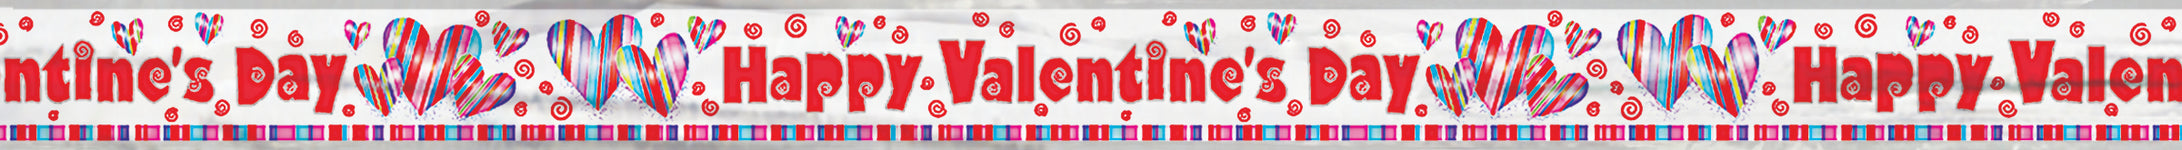 Happy Valentine's Day Banner by Unique from Instaballoons